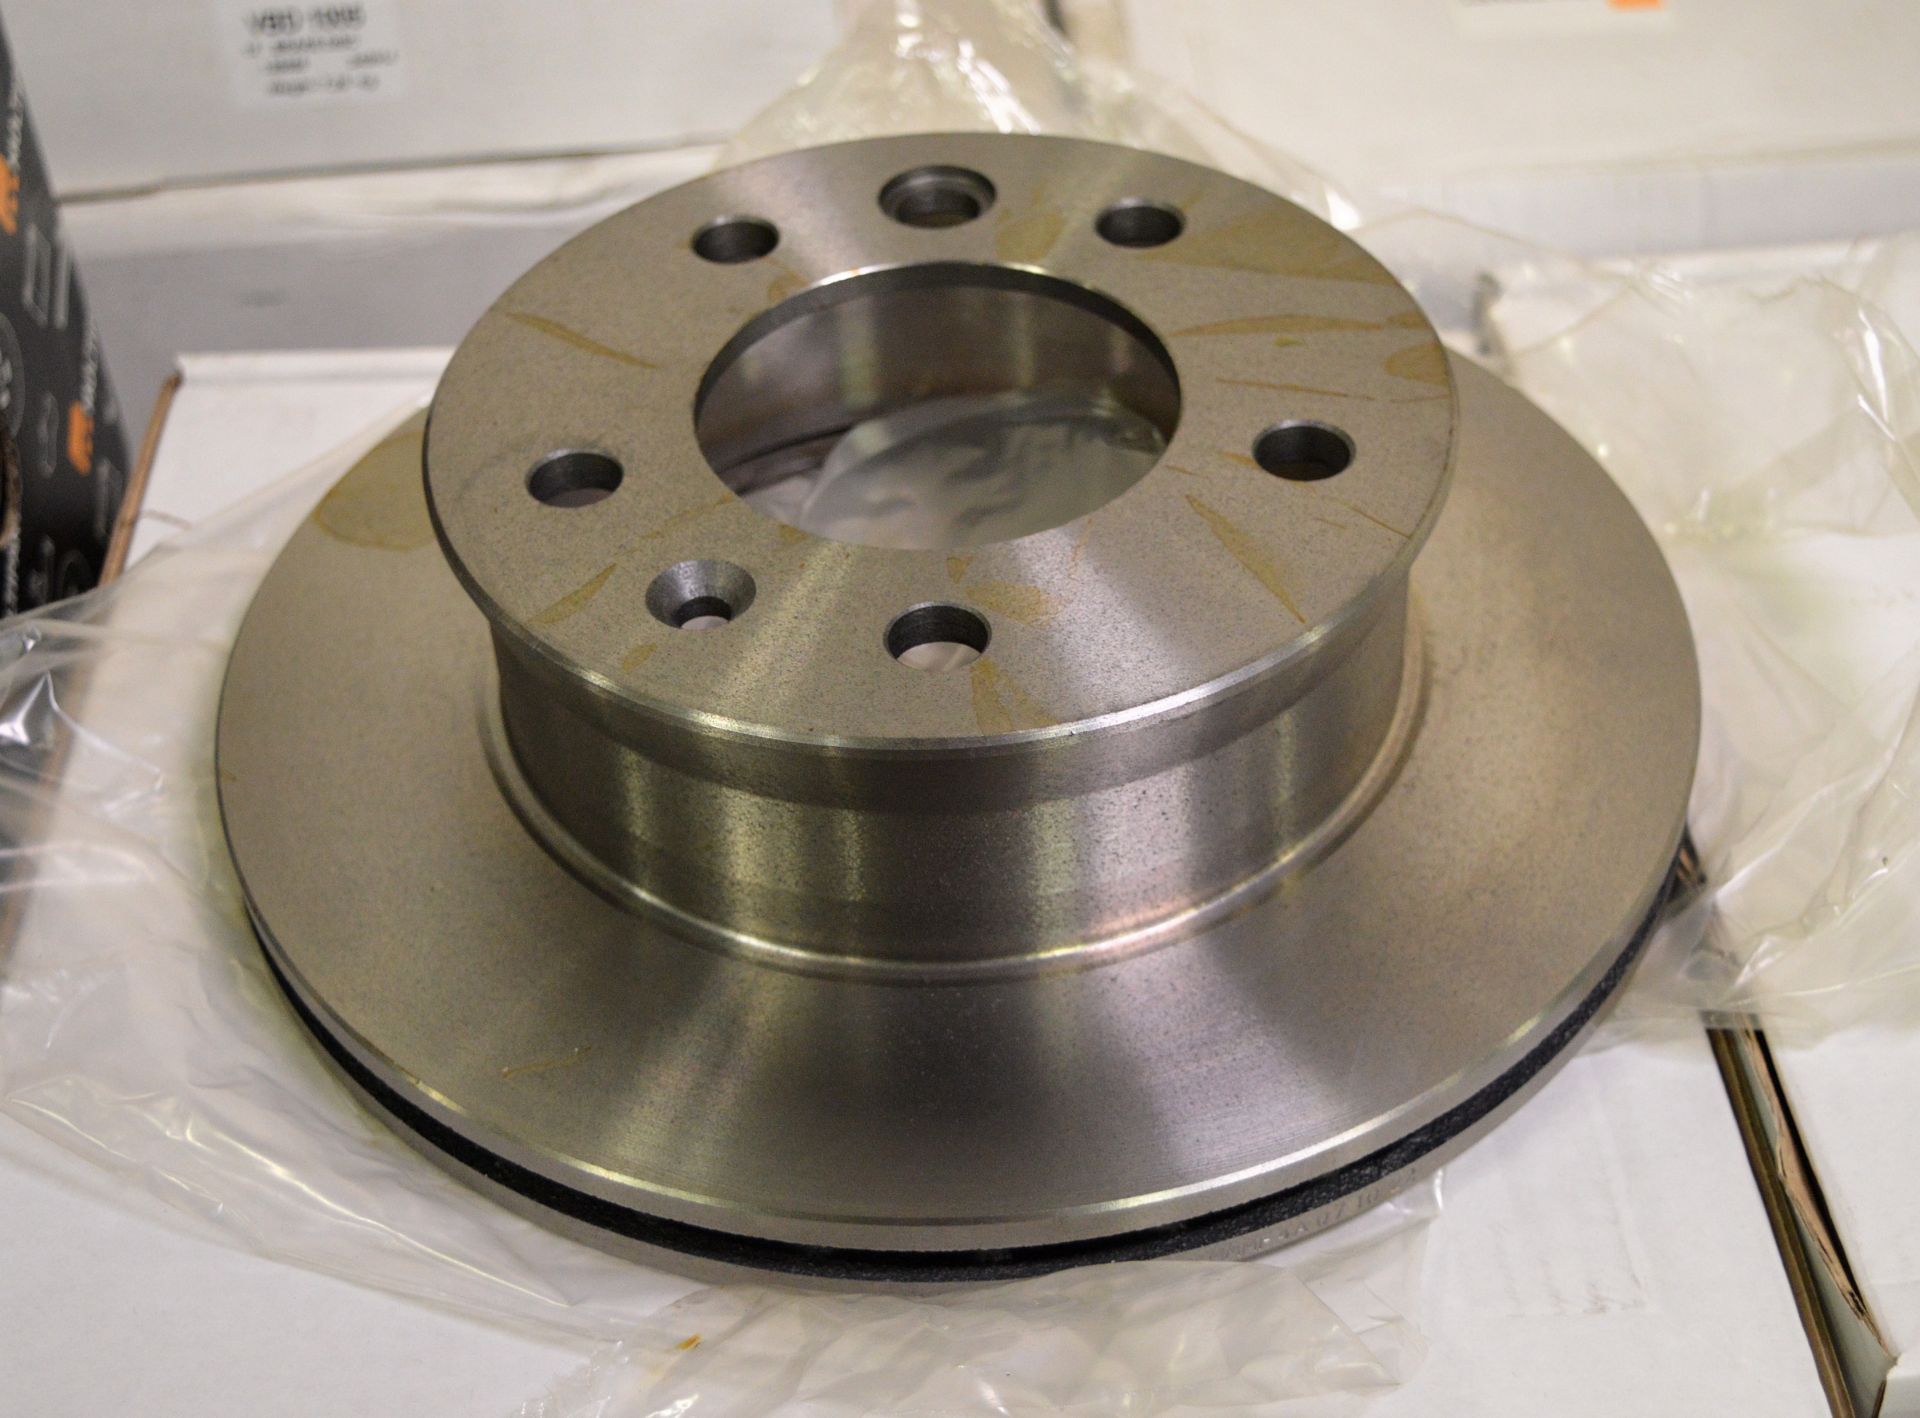 Vehicle parts - clutch kits, brake discs - see picture for itinerary for model numbers and - Image 4 of 5